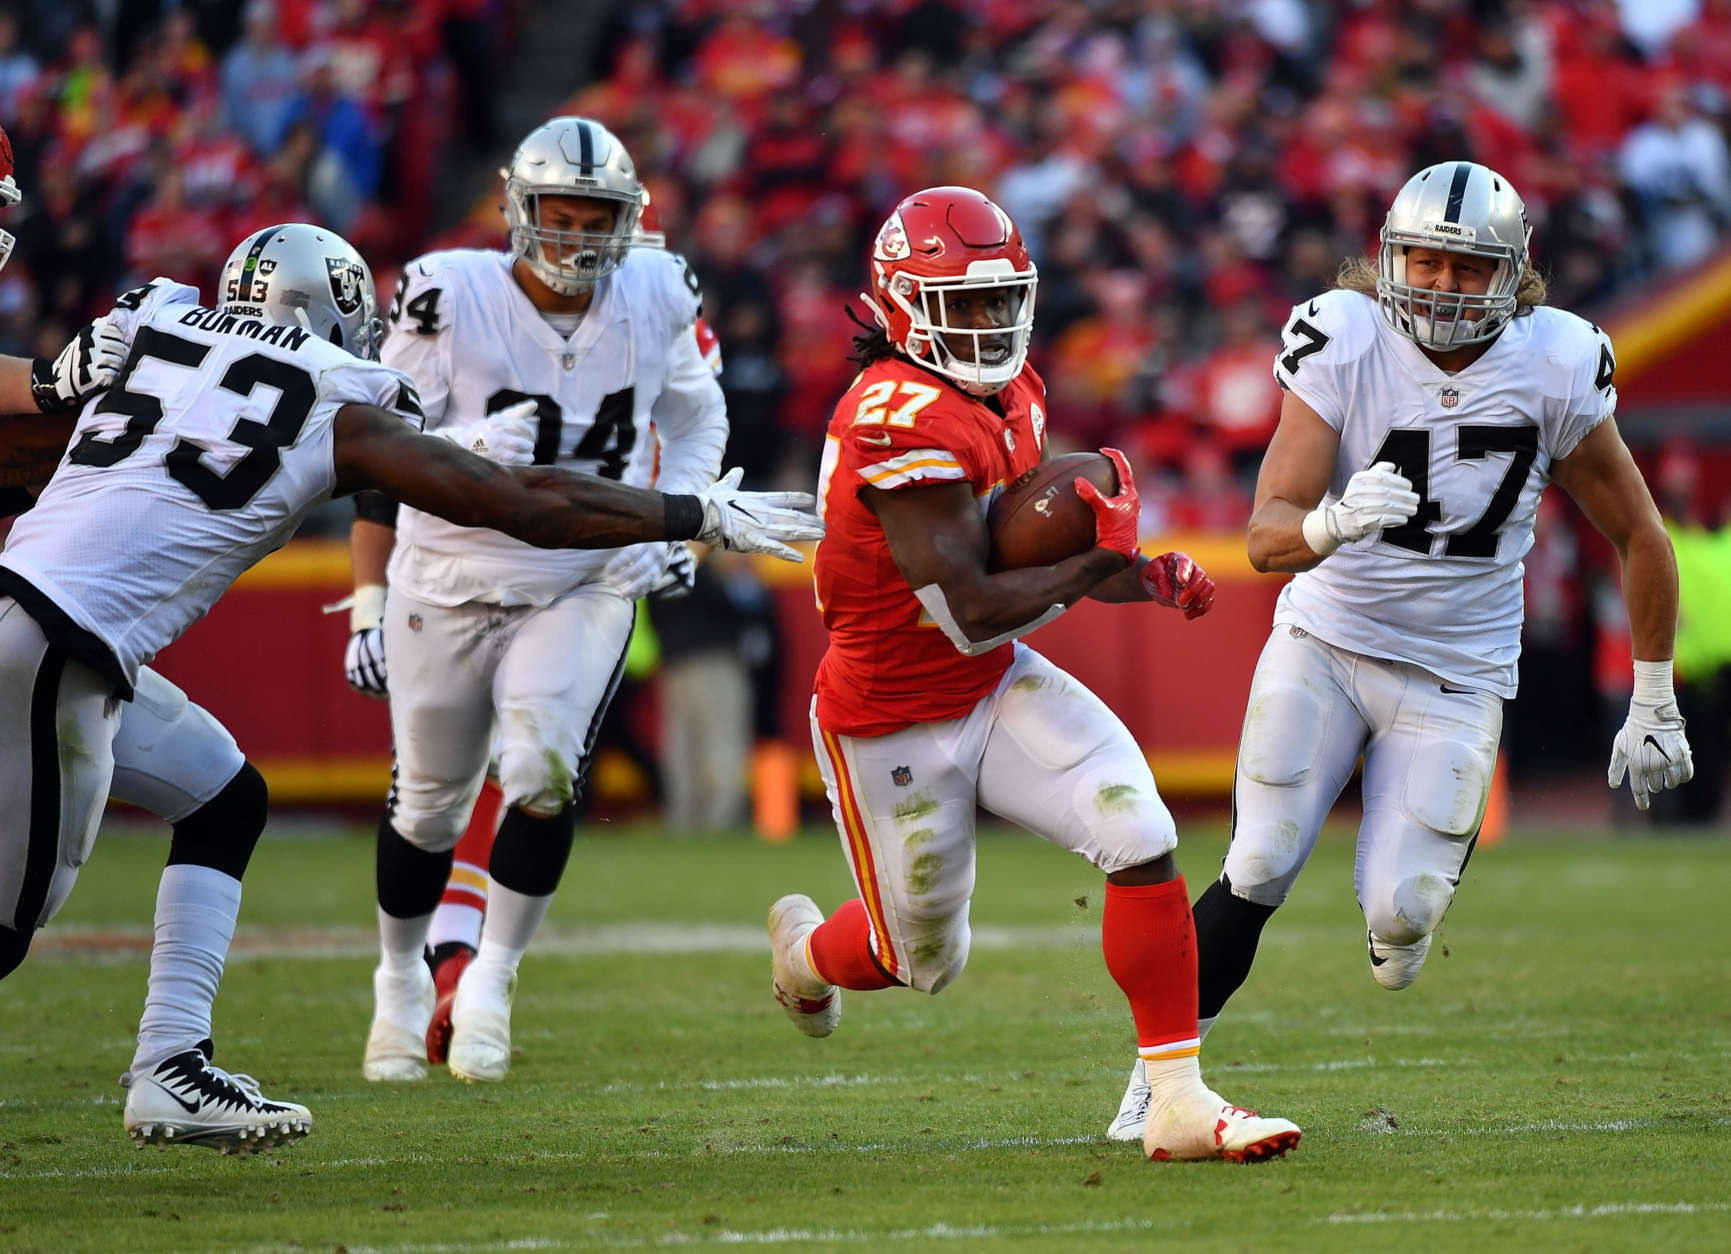 KANSAS CITY, MO - DECEMBER 10:  Running back Kareem Hunt #27 of the Kansas City Chiefs carries the ball during the game against the Oakland Raiders at Arrowhead Stadium on December 10, 2017 in Kansas City, Missouri.  (Photo by Peter Aiken/Getty Images)